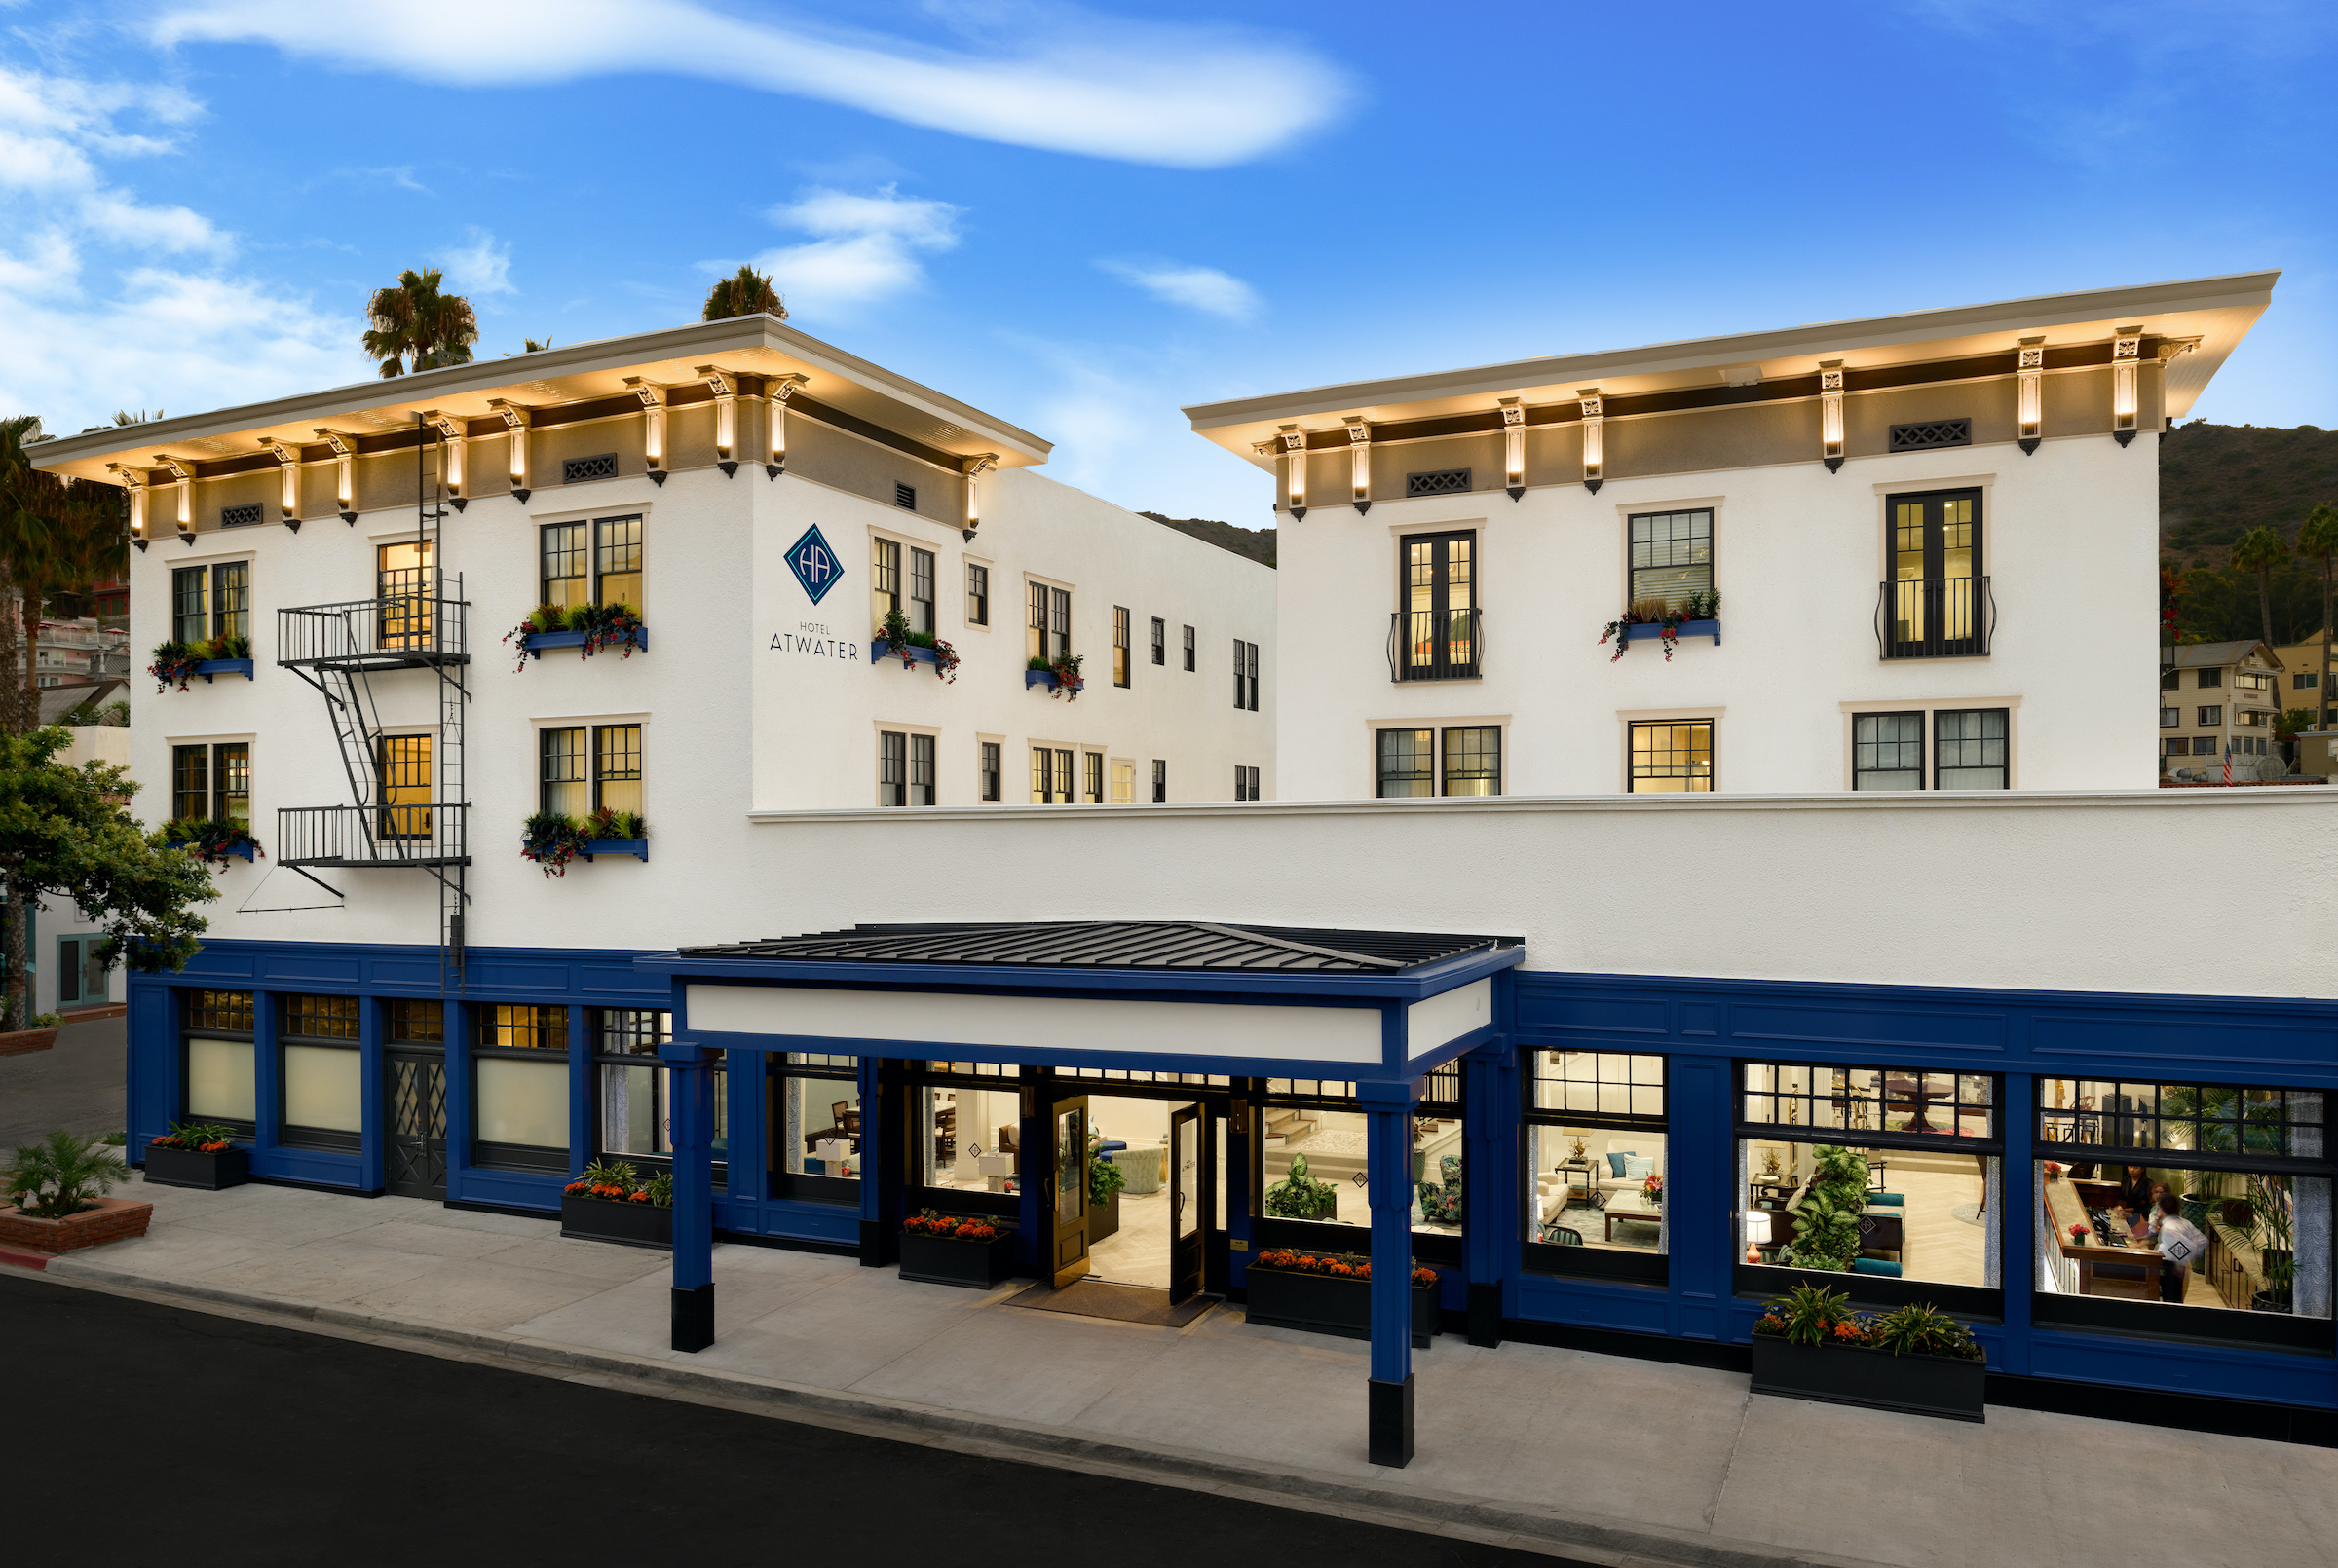 The recently renovated historic Hotel Atwater is celebrating its 100th Anniversary.